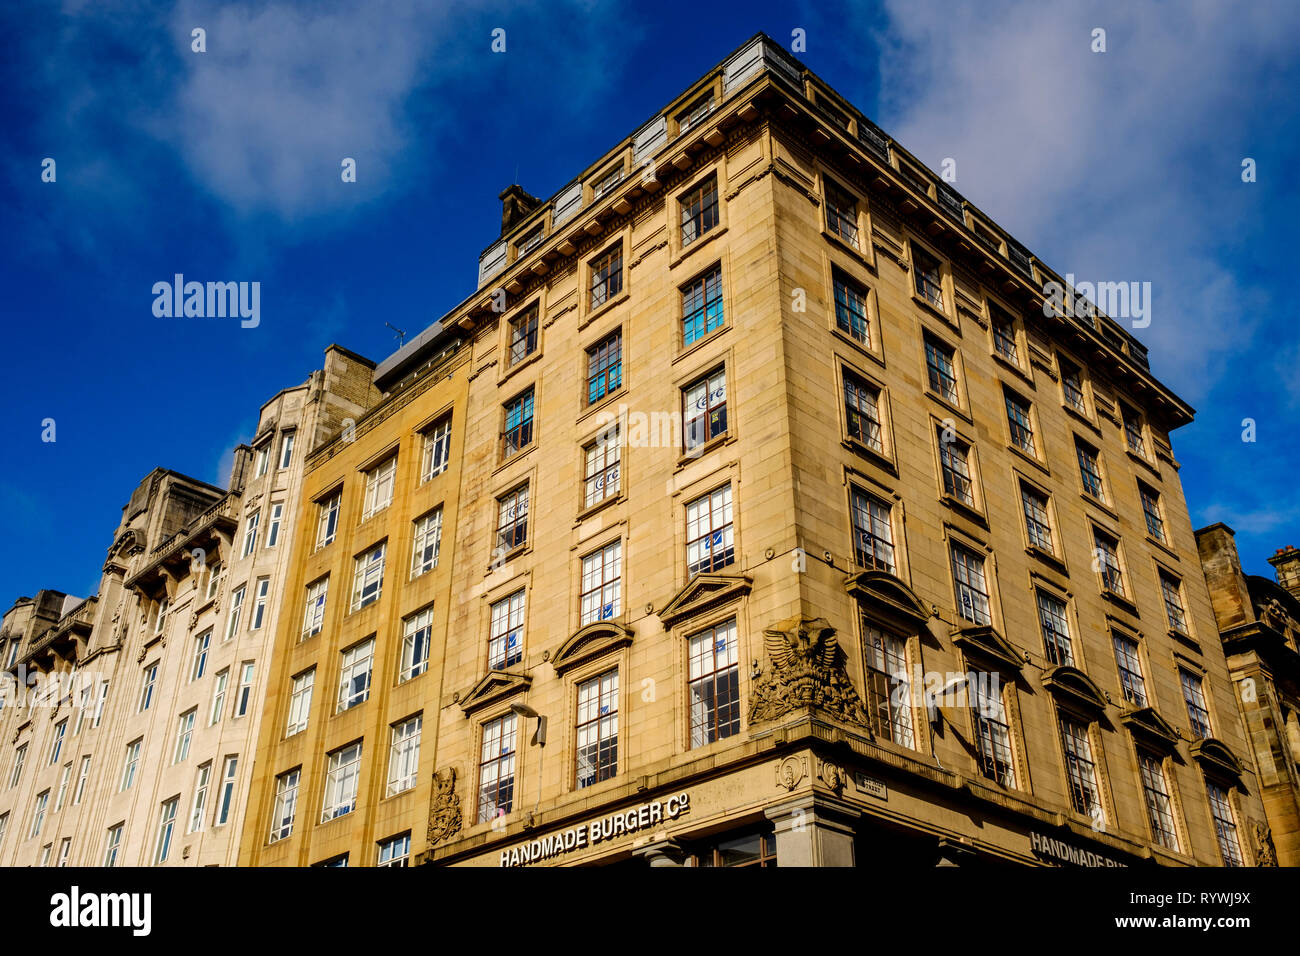 Traditional architecture in West Nile Street, Glasgow, Scotland Stock Photo